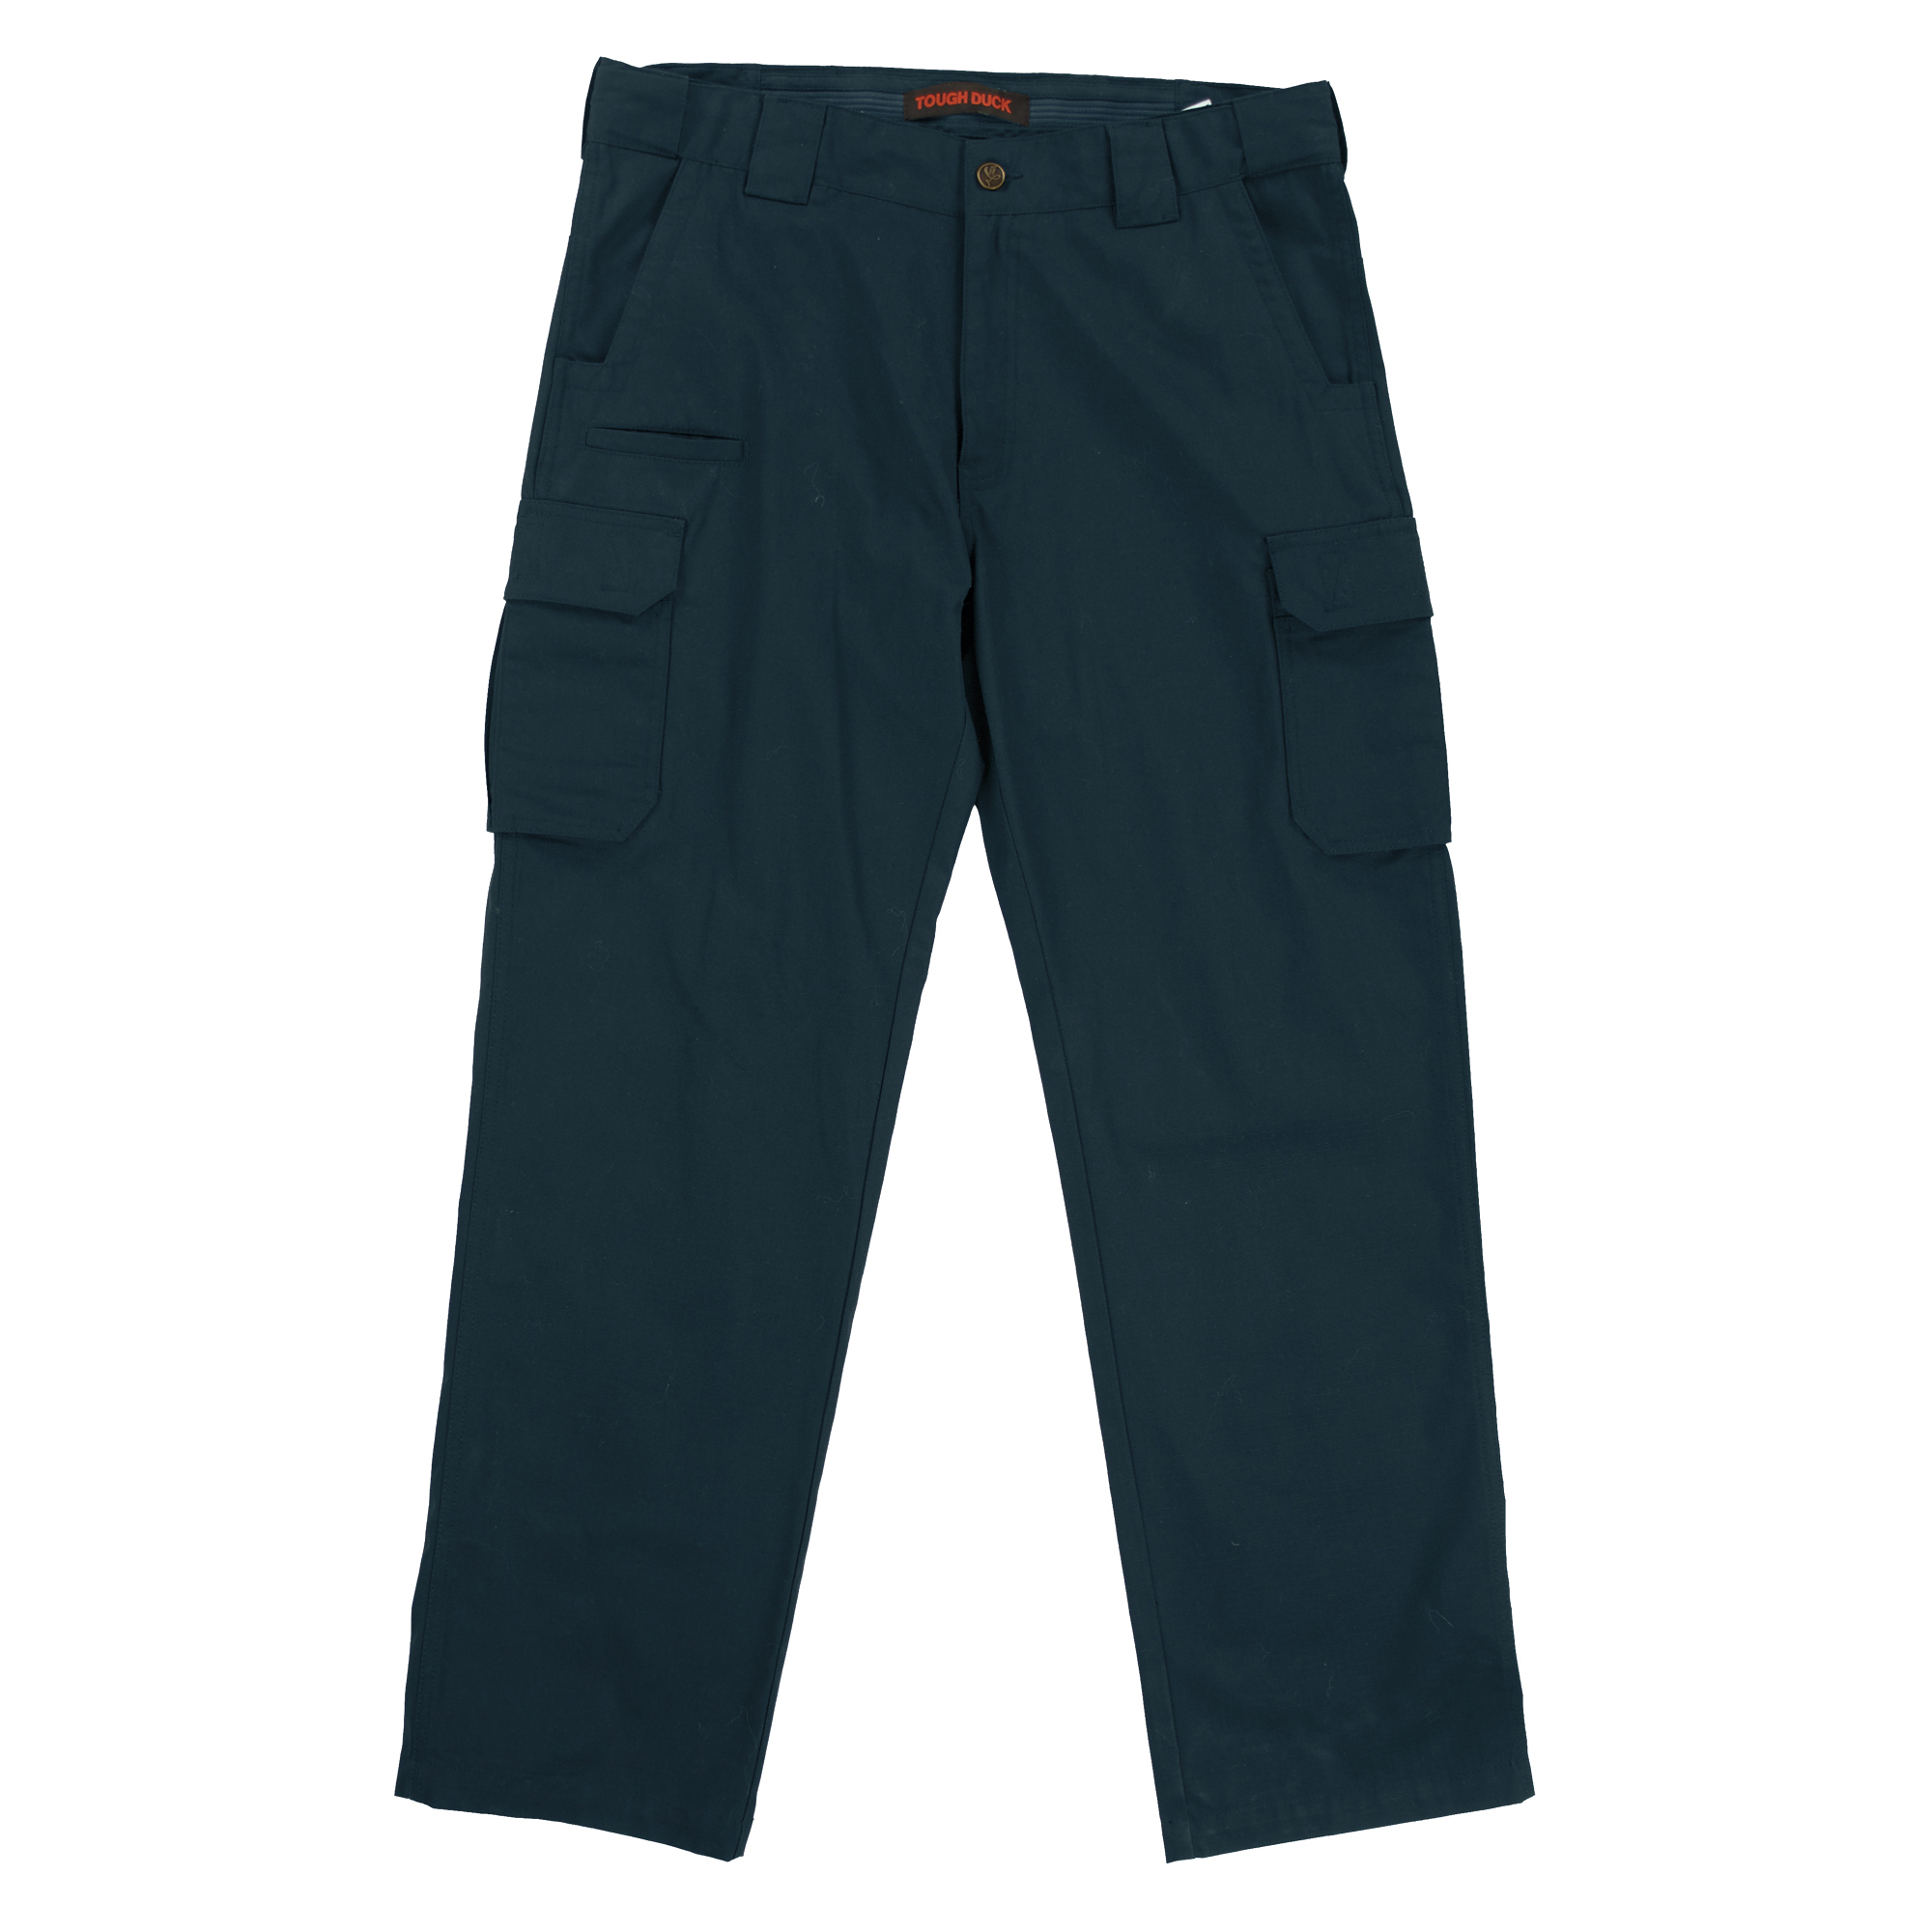 Tough Duck, Ripstop Cargo Pant, Waist 34 in, Inseam 34 in, Color Navy, Model WP113